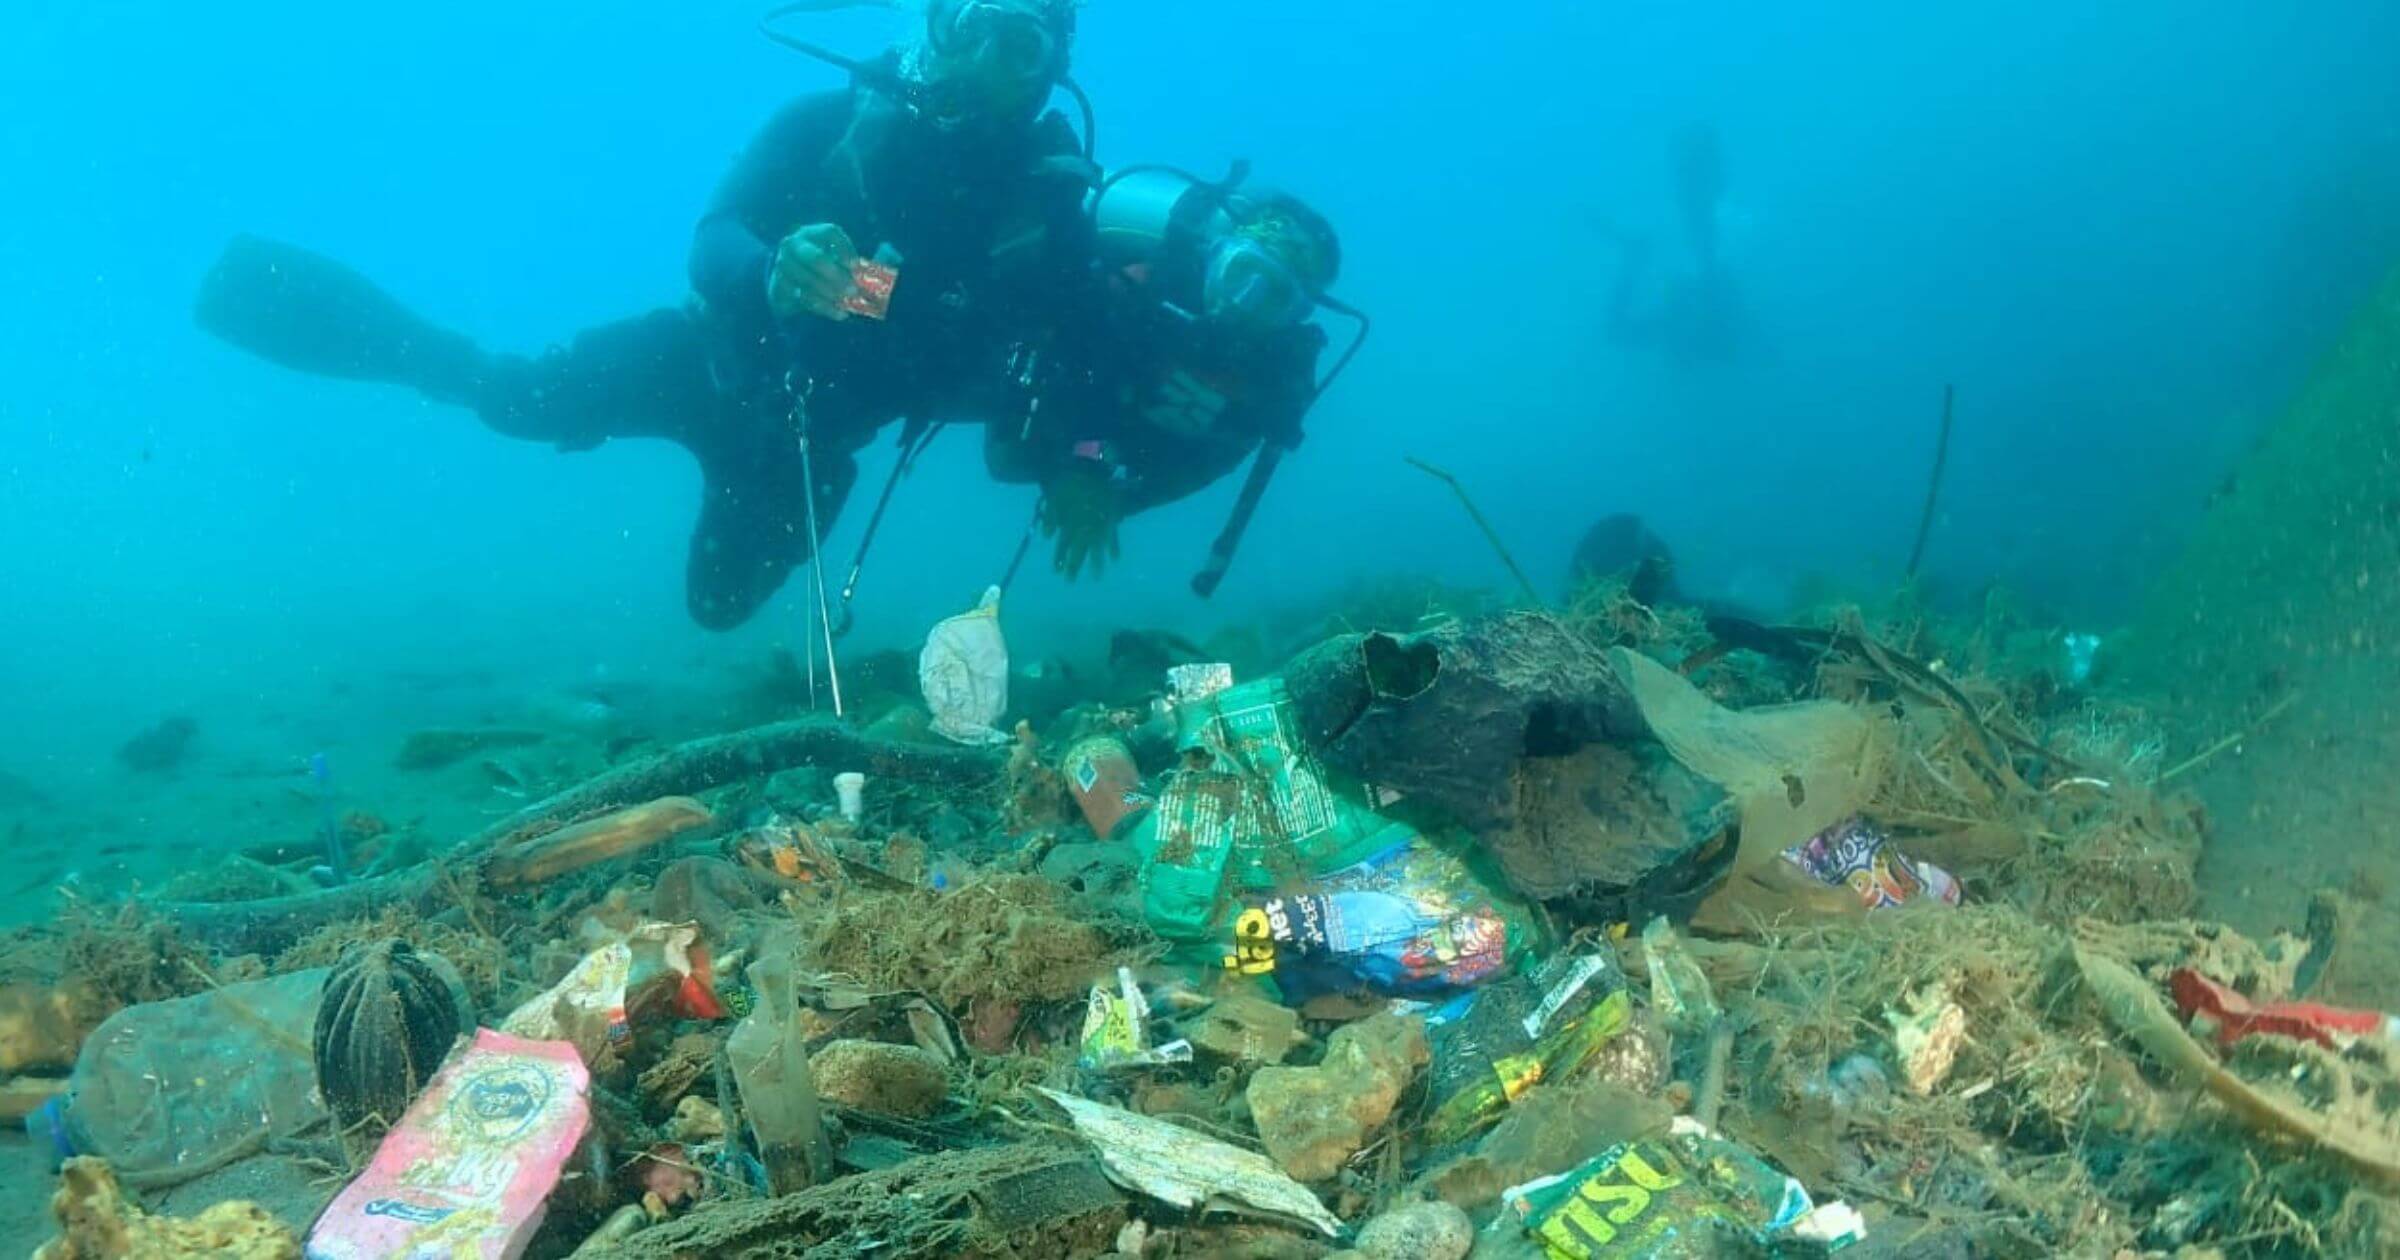 Two divers hover above piles of plastic items on the ocean floor